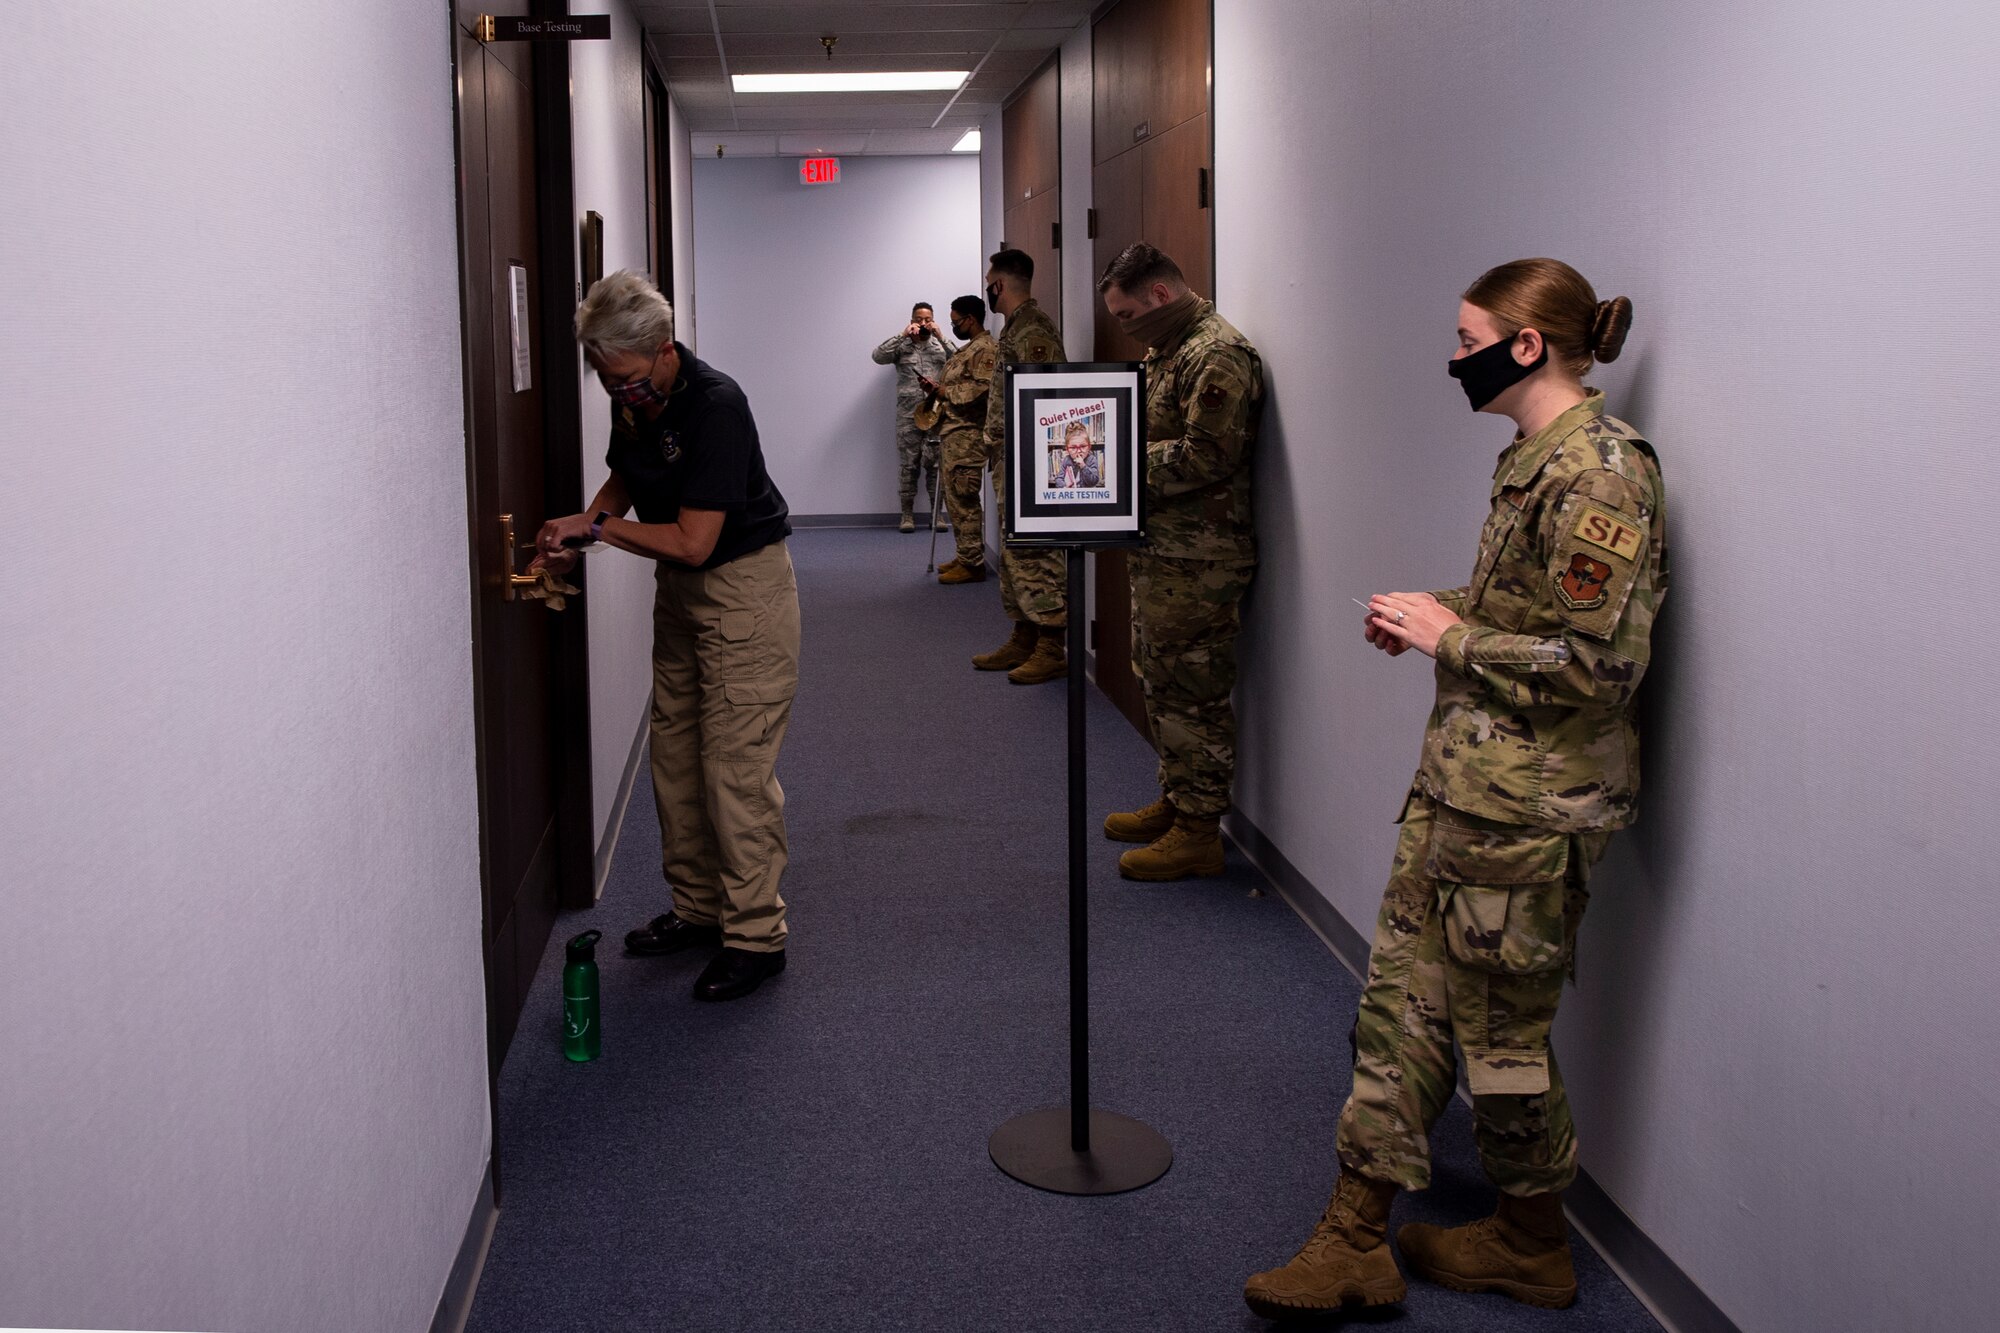 Jill Coles, the test control manager for the 97th Force Support Squadron, opens the base testing classroom prior to administering the Weighted Airmen Promotion System test, May 20, 2020 at Altus Air Force Base, Oklahoma.